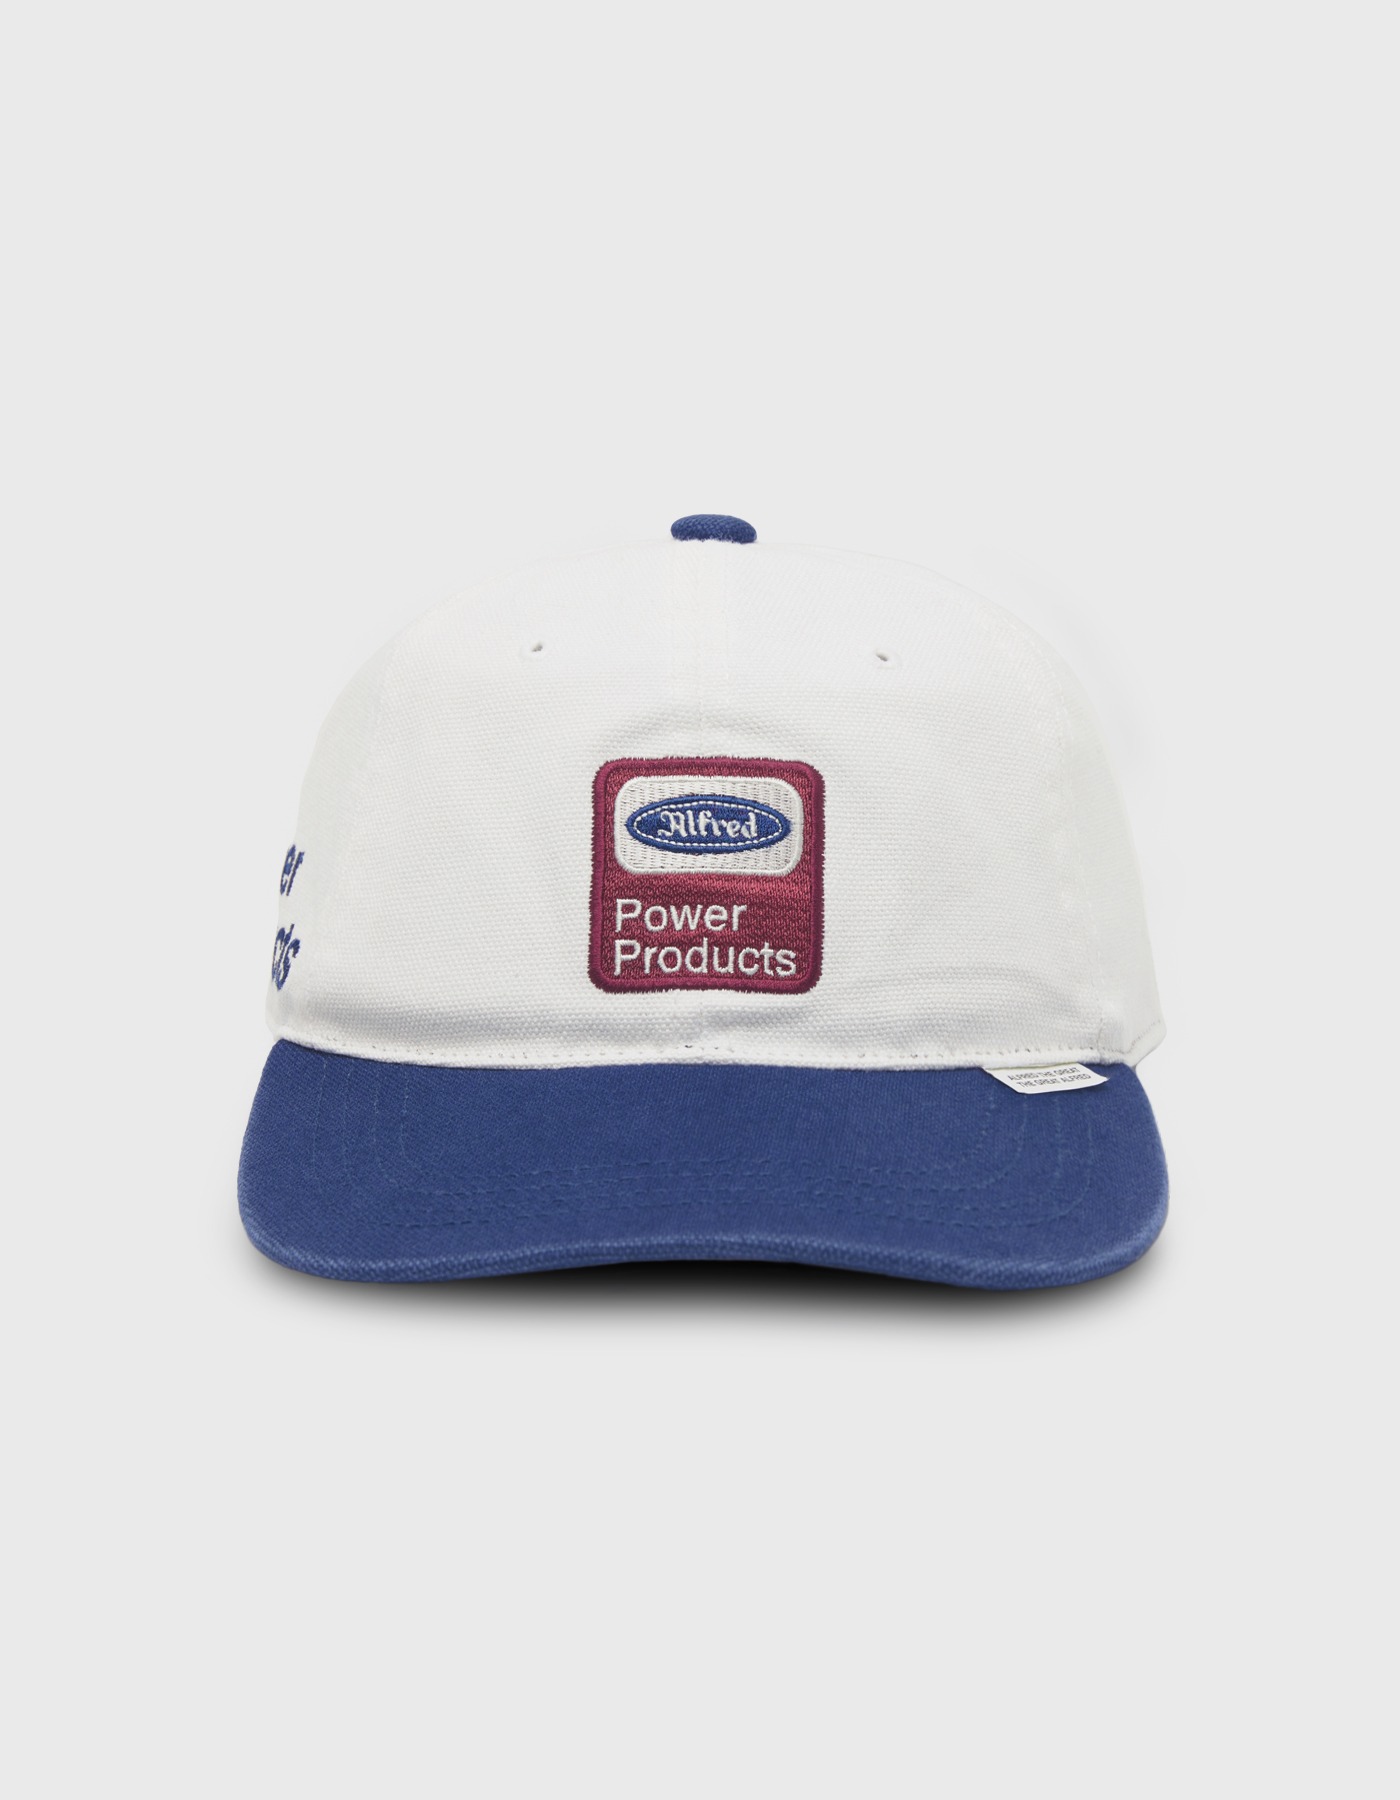 POWER PRODUCTS CAP / White-Blue